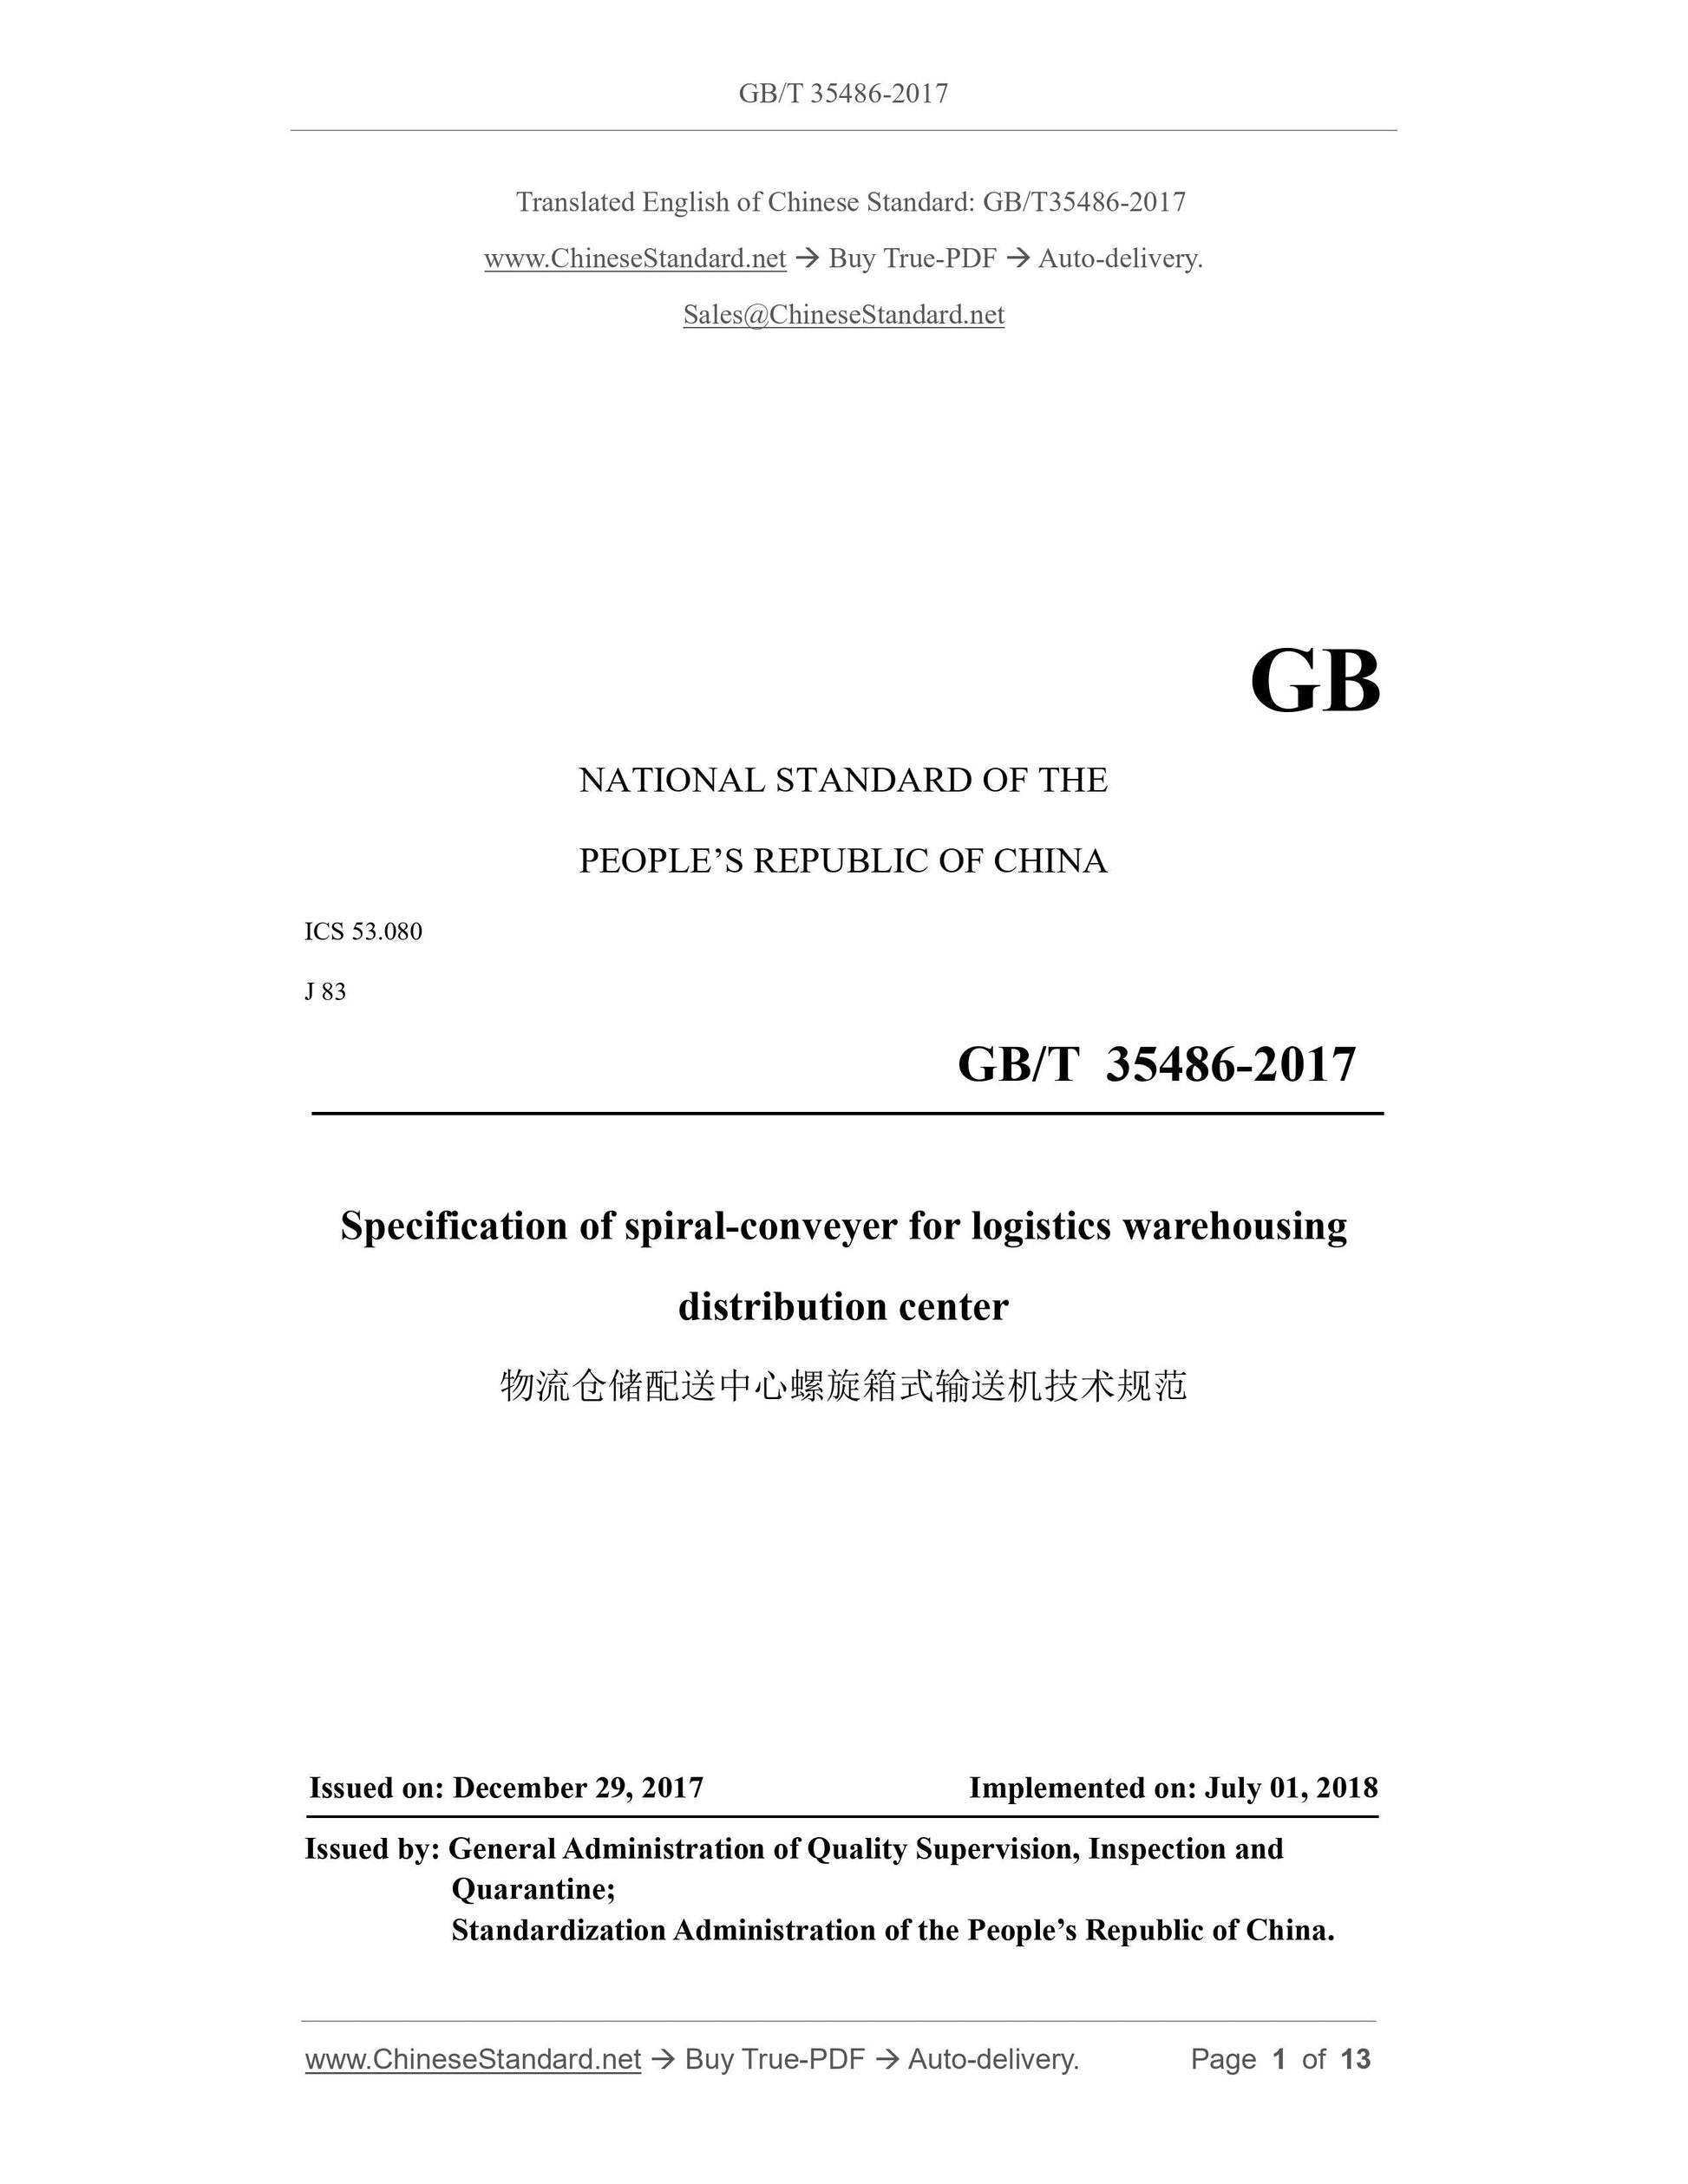 GB/T 35486-2017 Page 1